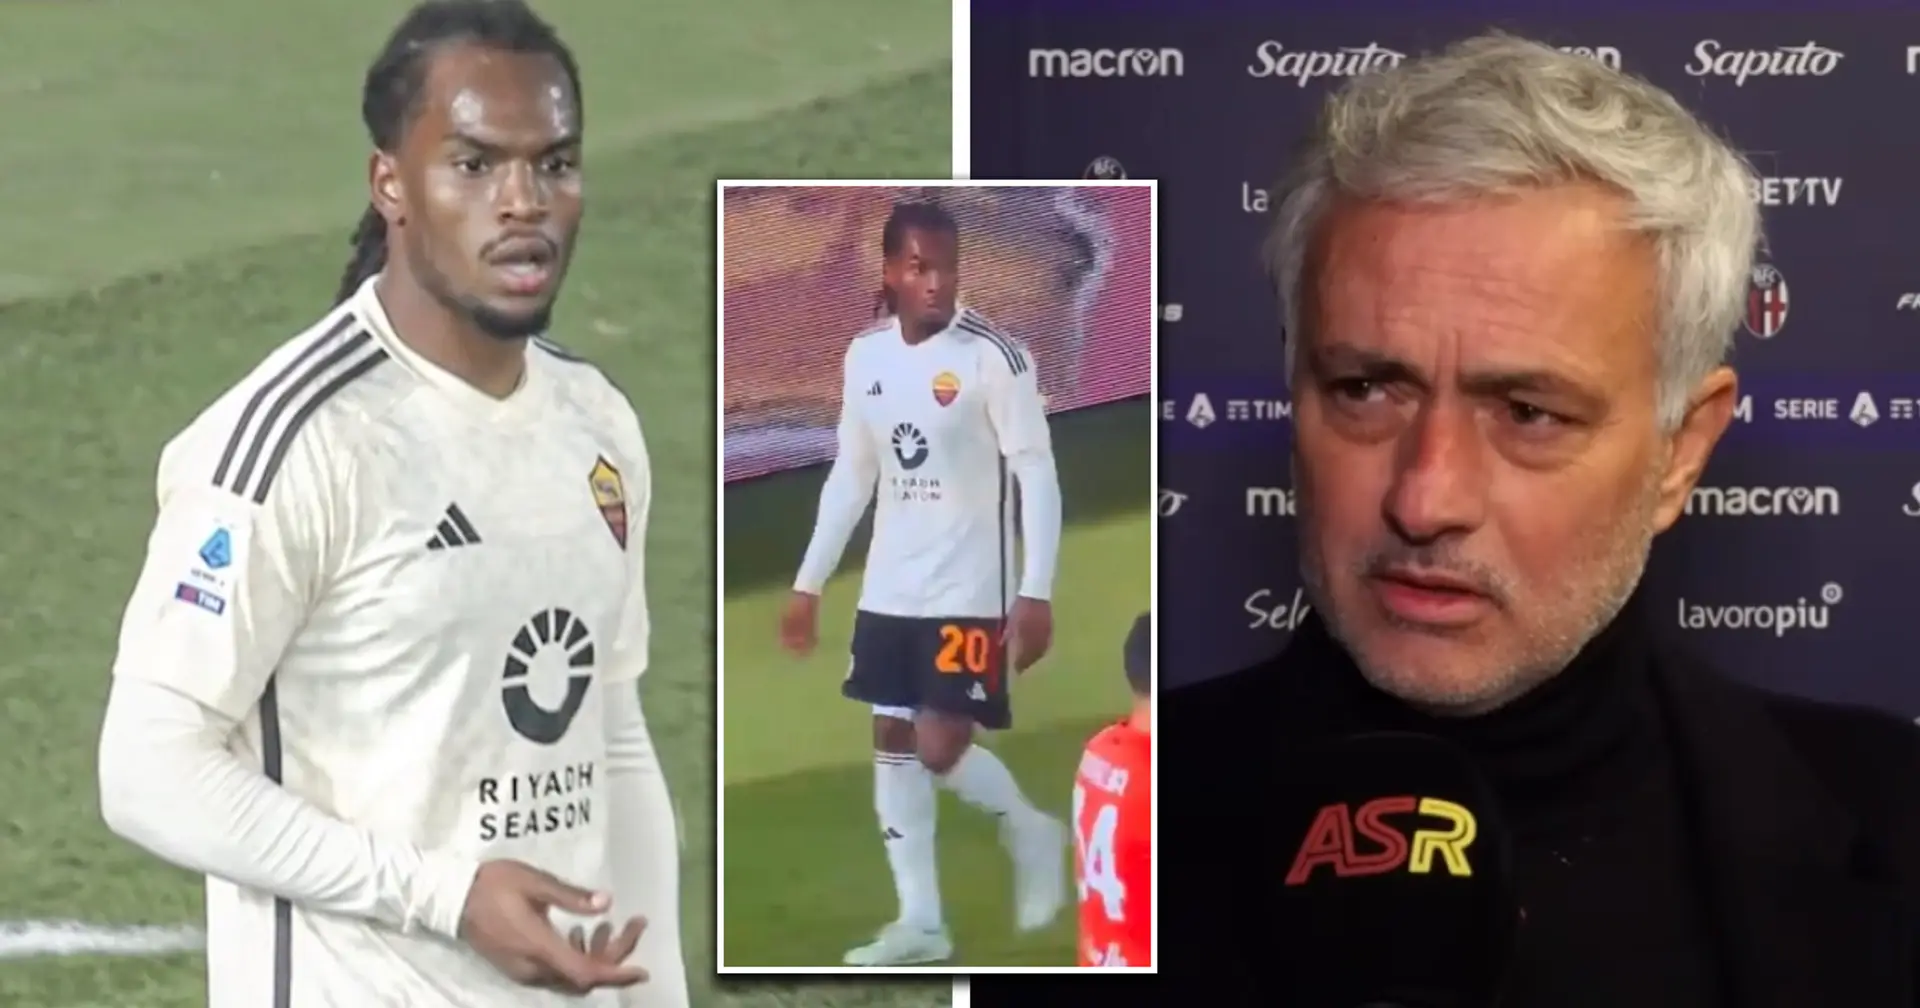 'It's not easy': Mourinho brutally subs Renato Sanches just 18 minutes after bringing him on